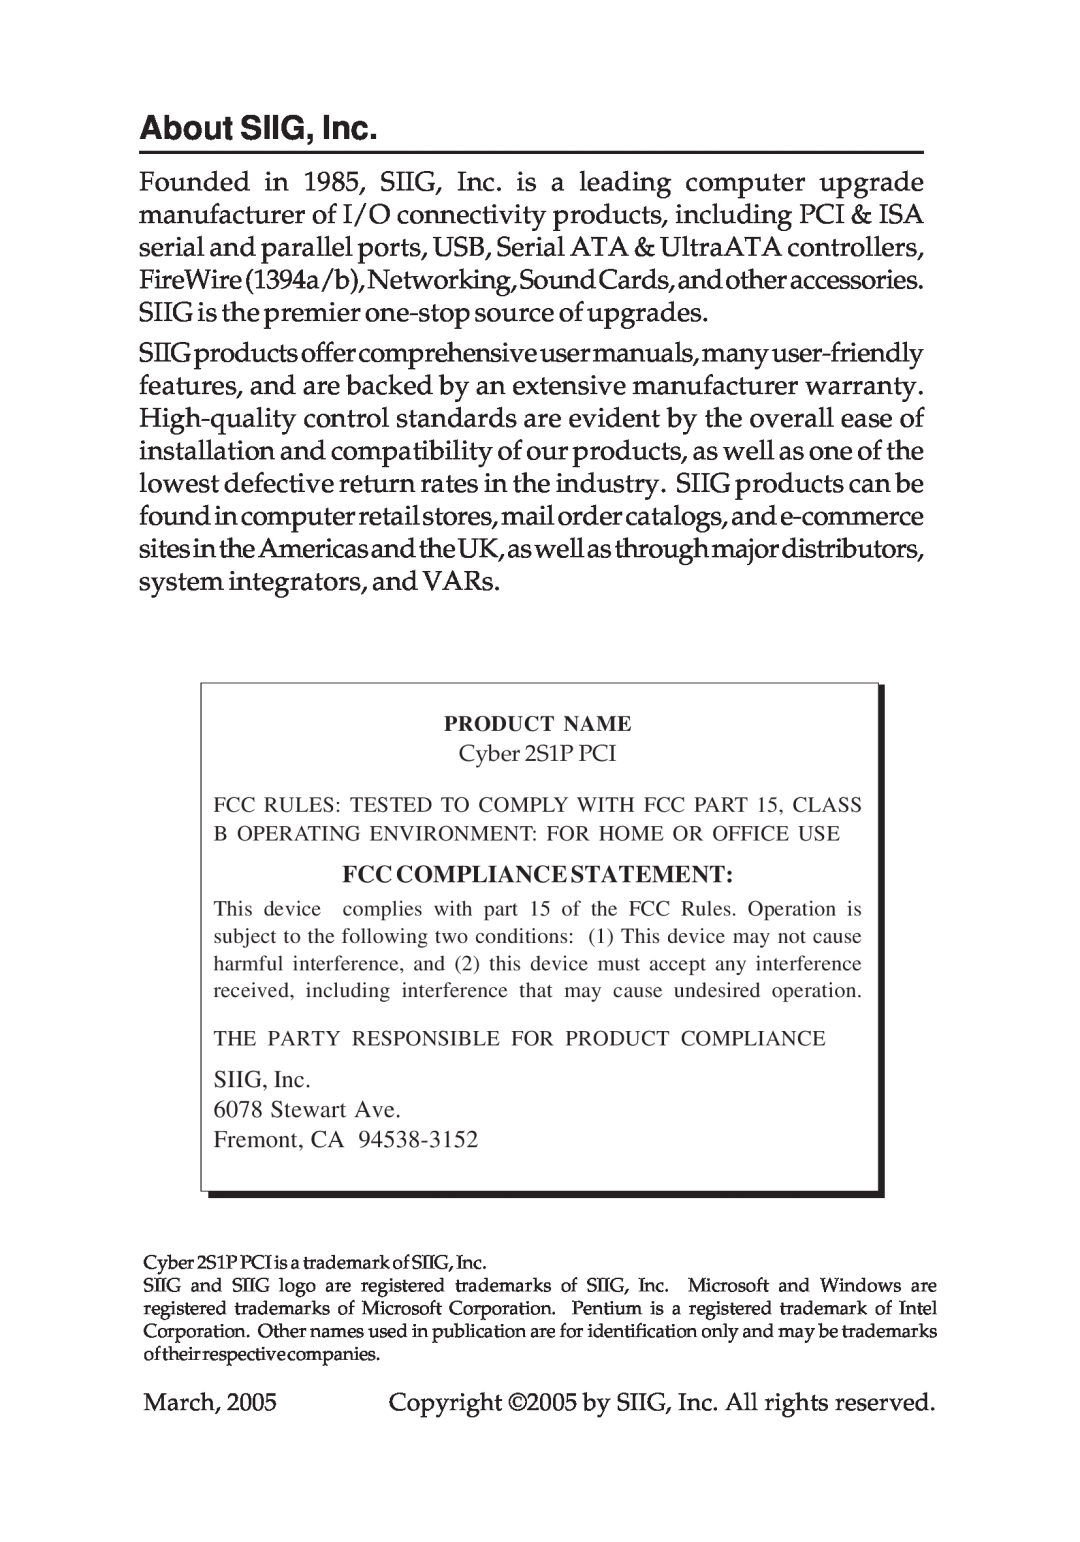 SIIG 2S1P manual About SIIG, Inc, Fcc Compliance Statement 